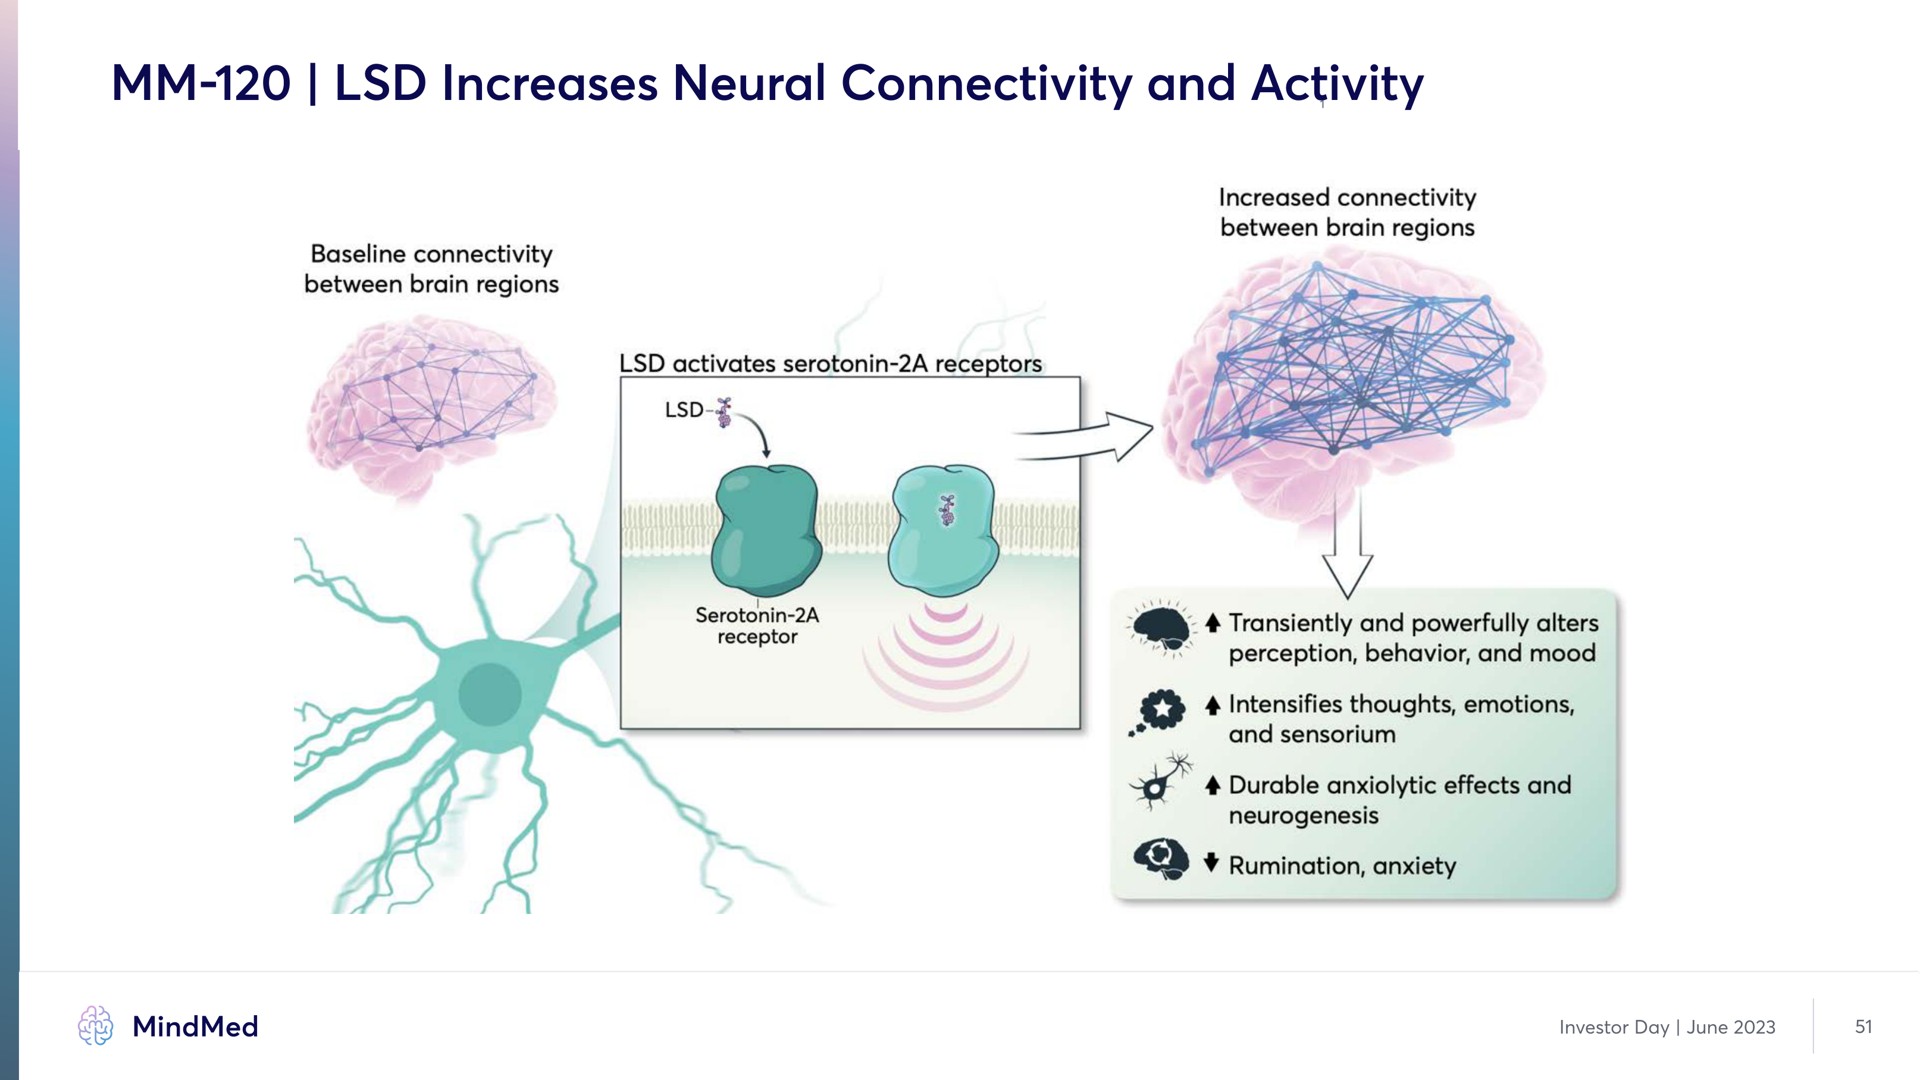 increases neural connectivity and activity | MindMed